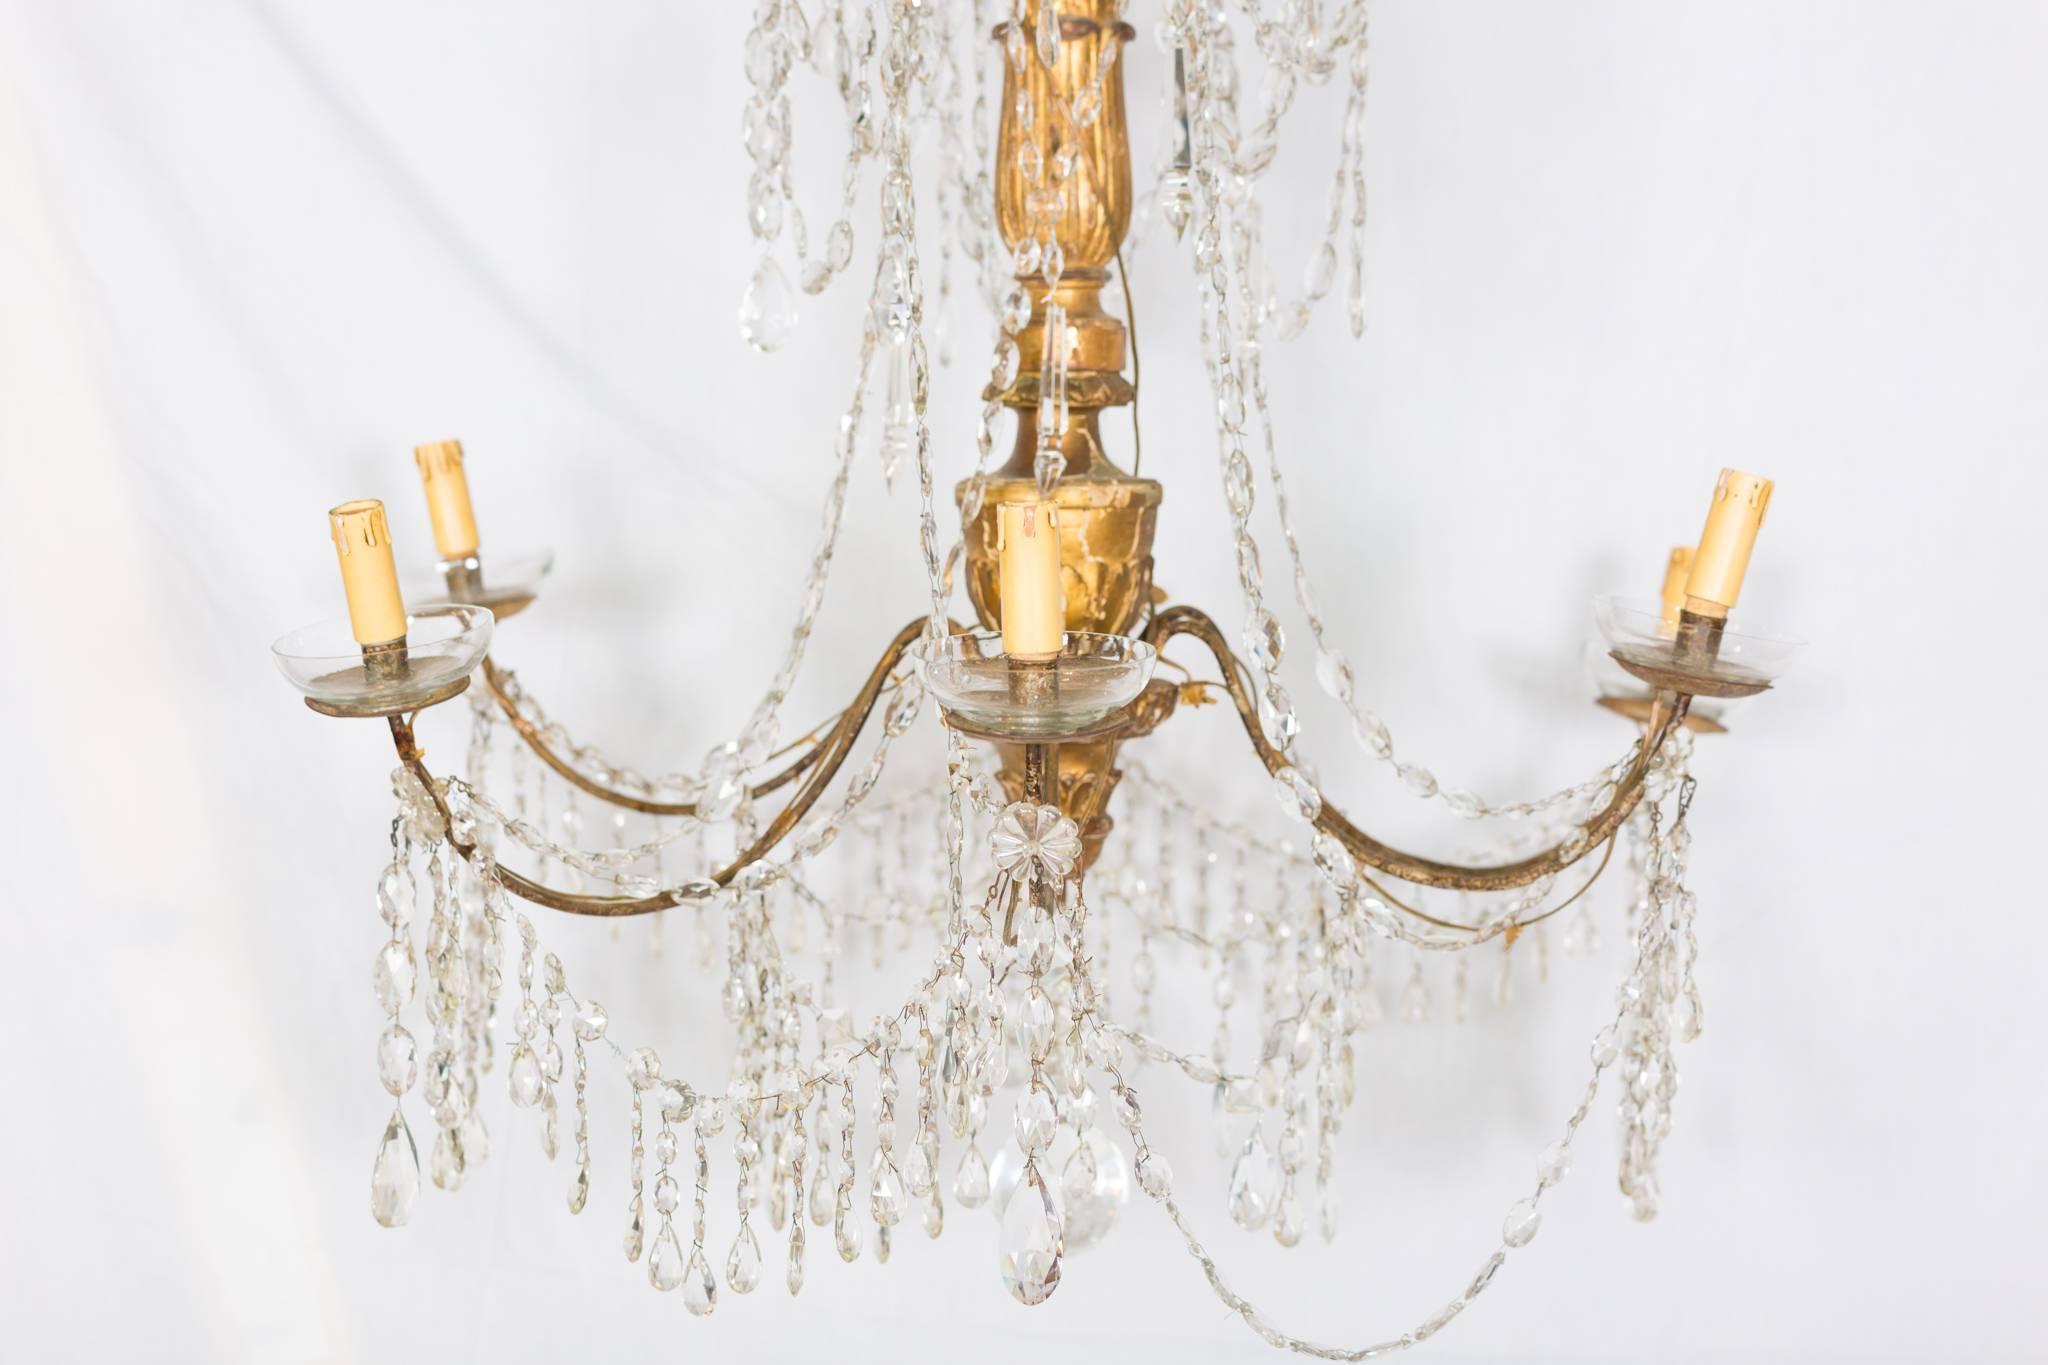  Italian Giltwood and Crystal Chandelier, 18th Century 3